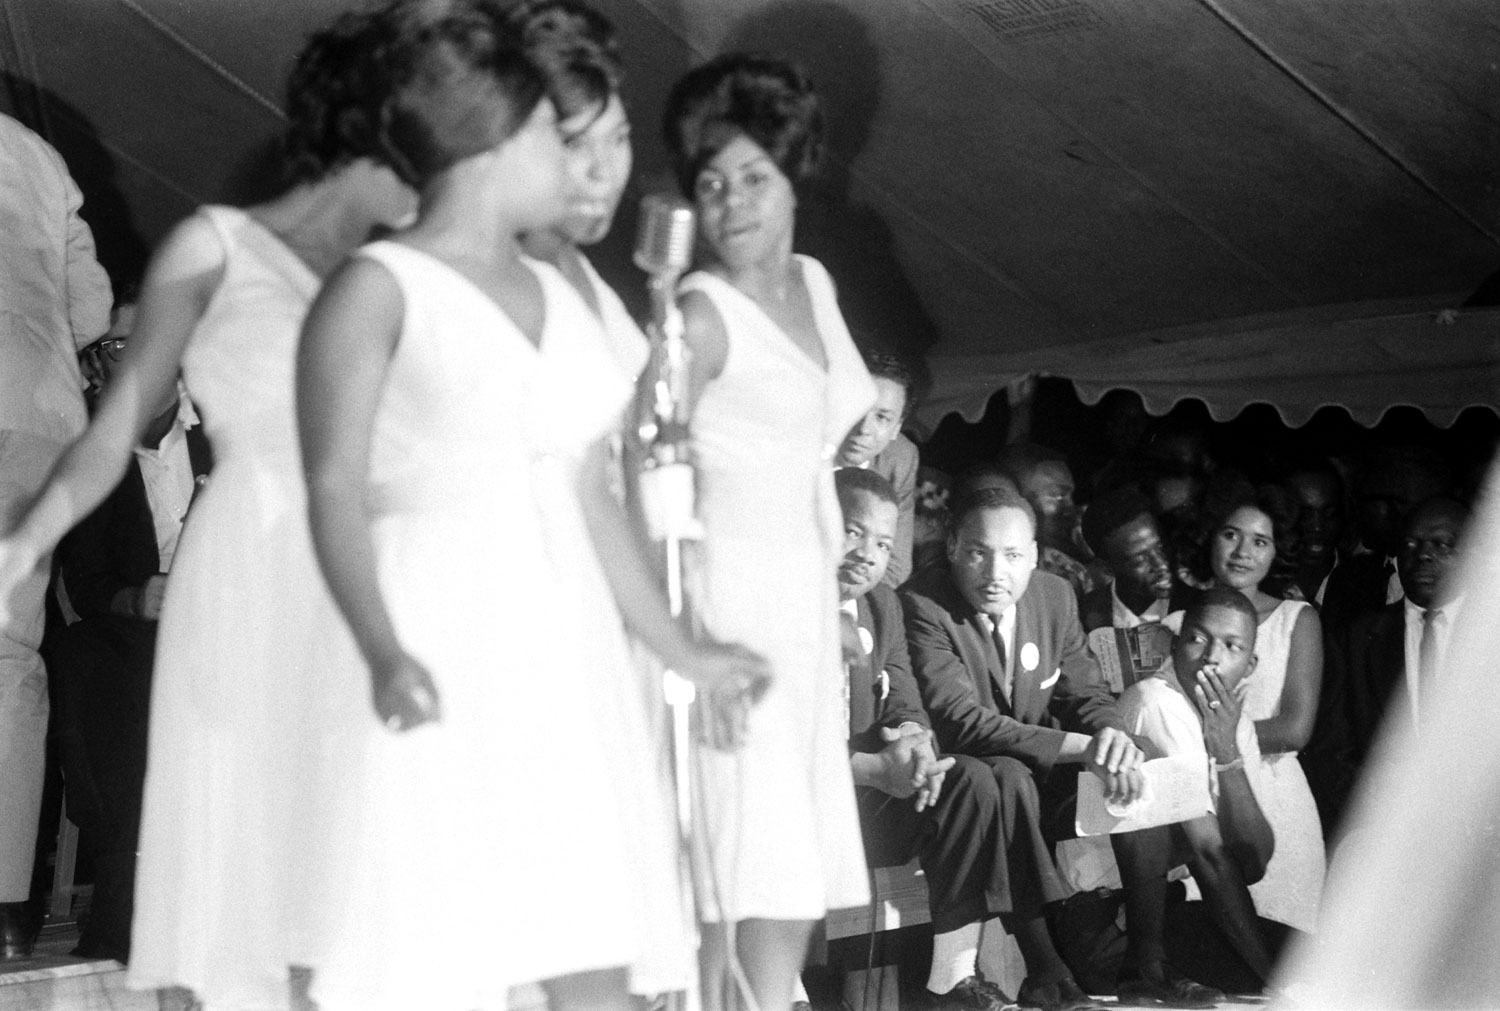 Martin Luther King Jr. (seated, at right) watches the Shirelles perform during the Salute to Freedom benefit concert in Birmingham, Ala., August 5, 1963.